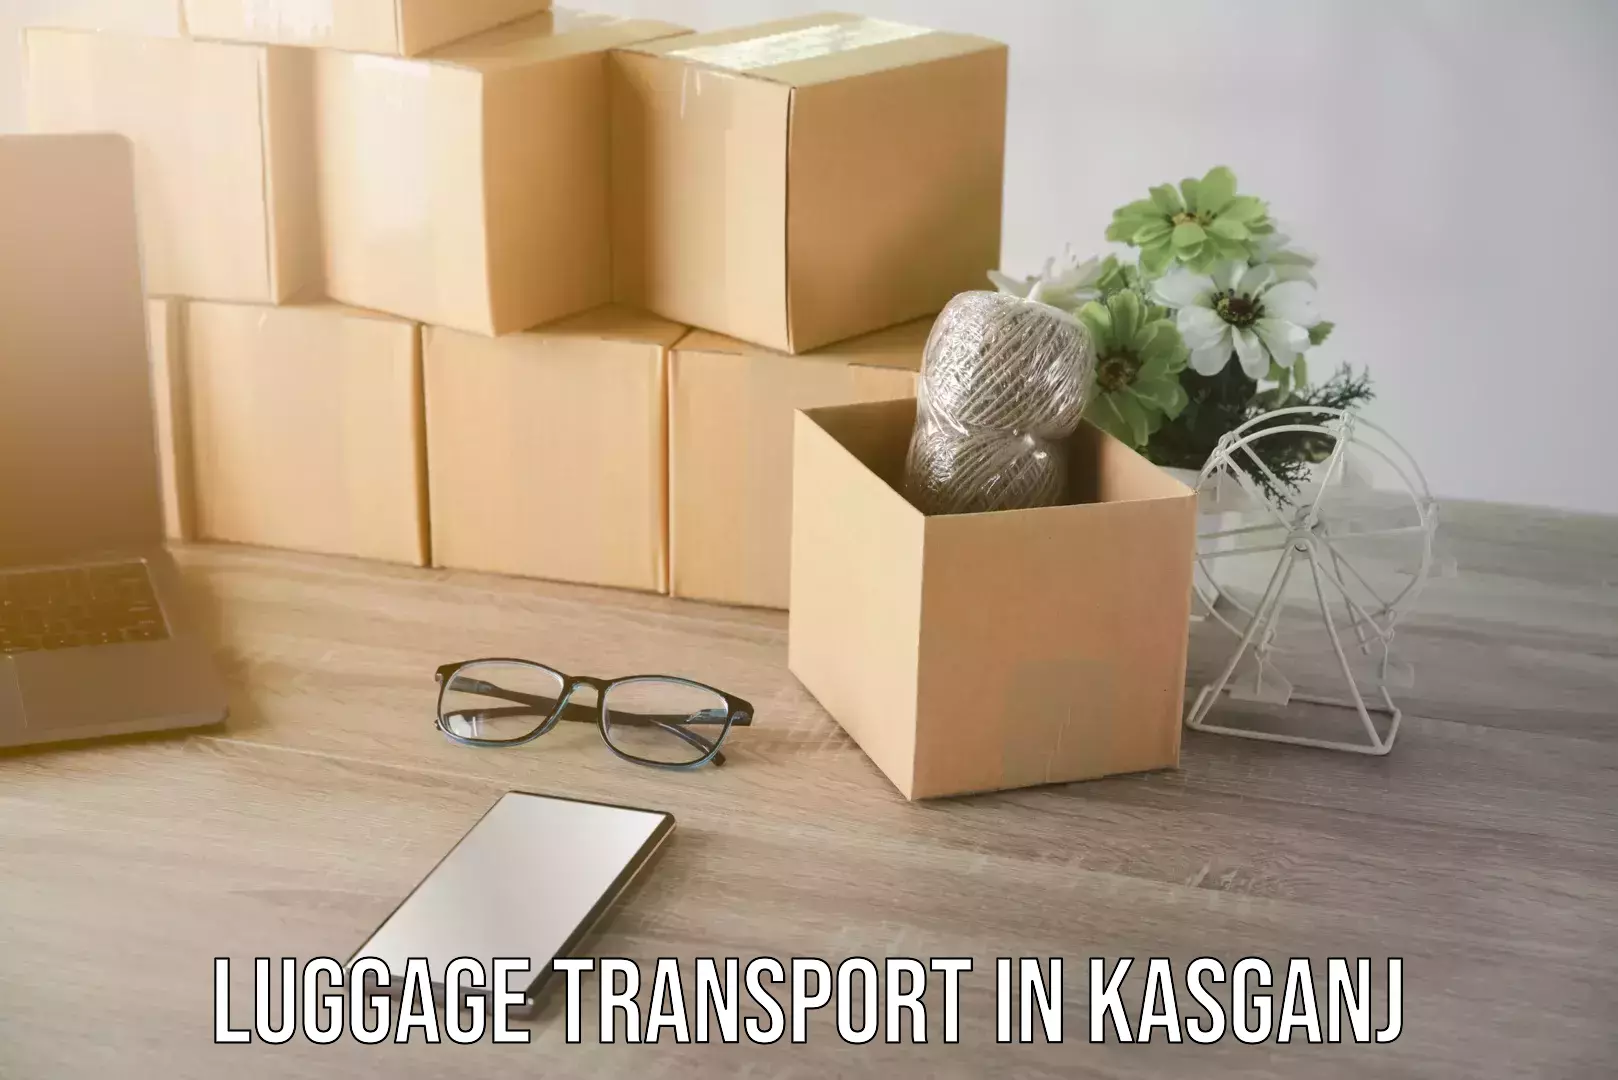 Luggage transport consulting in Kasganj